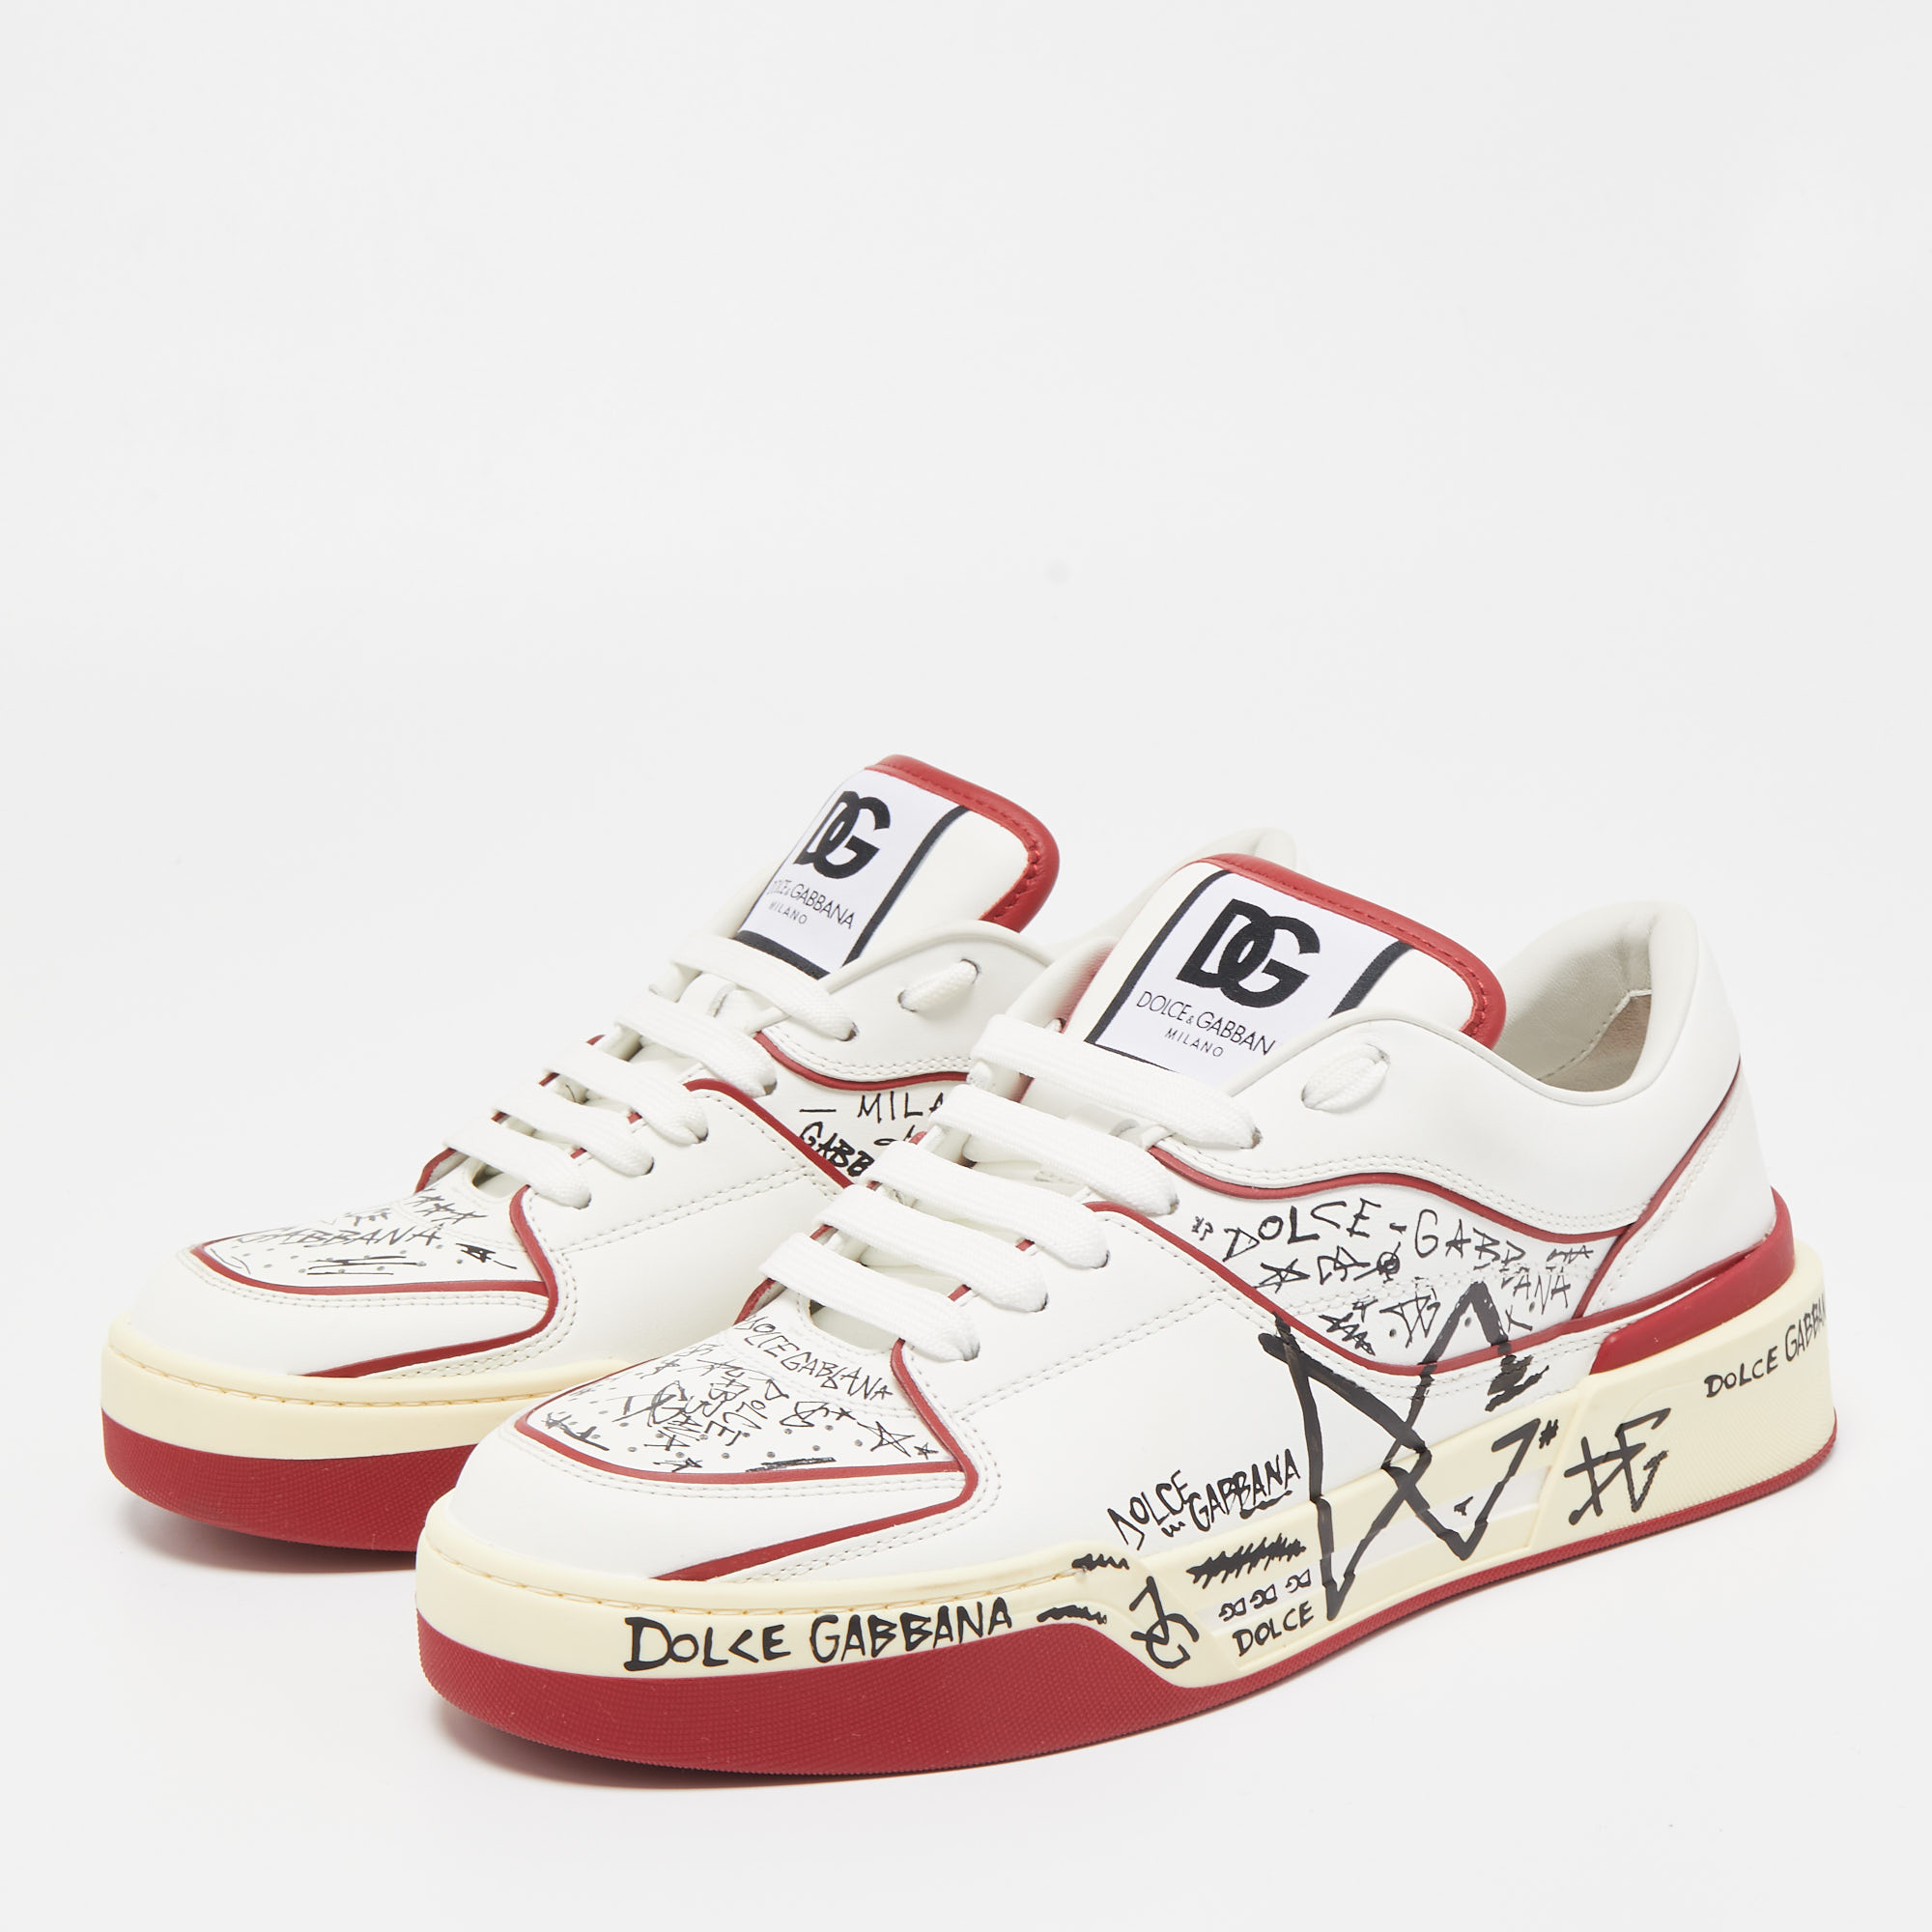 

Dolce & Gabbana Red/White Printed Leather New Roma Low-Top Sneakers Size